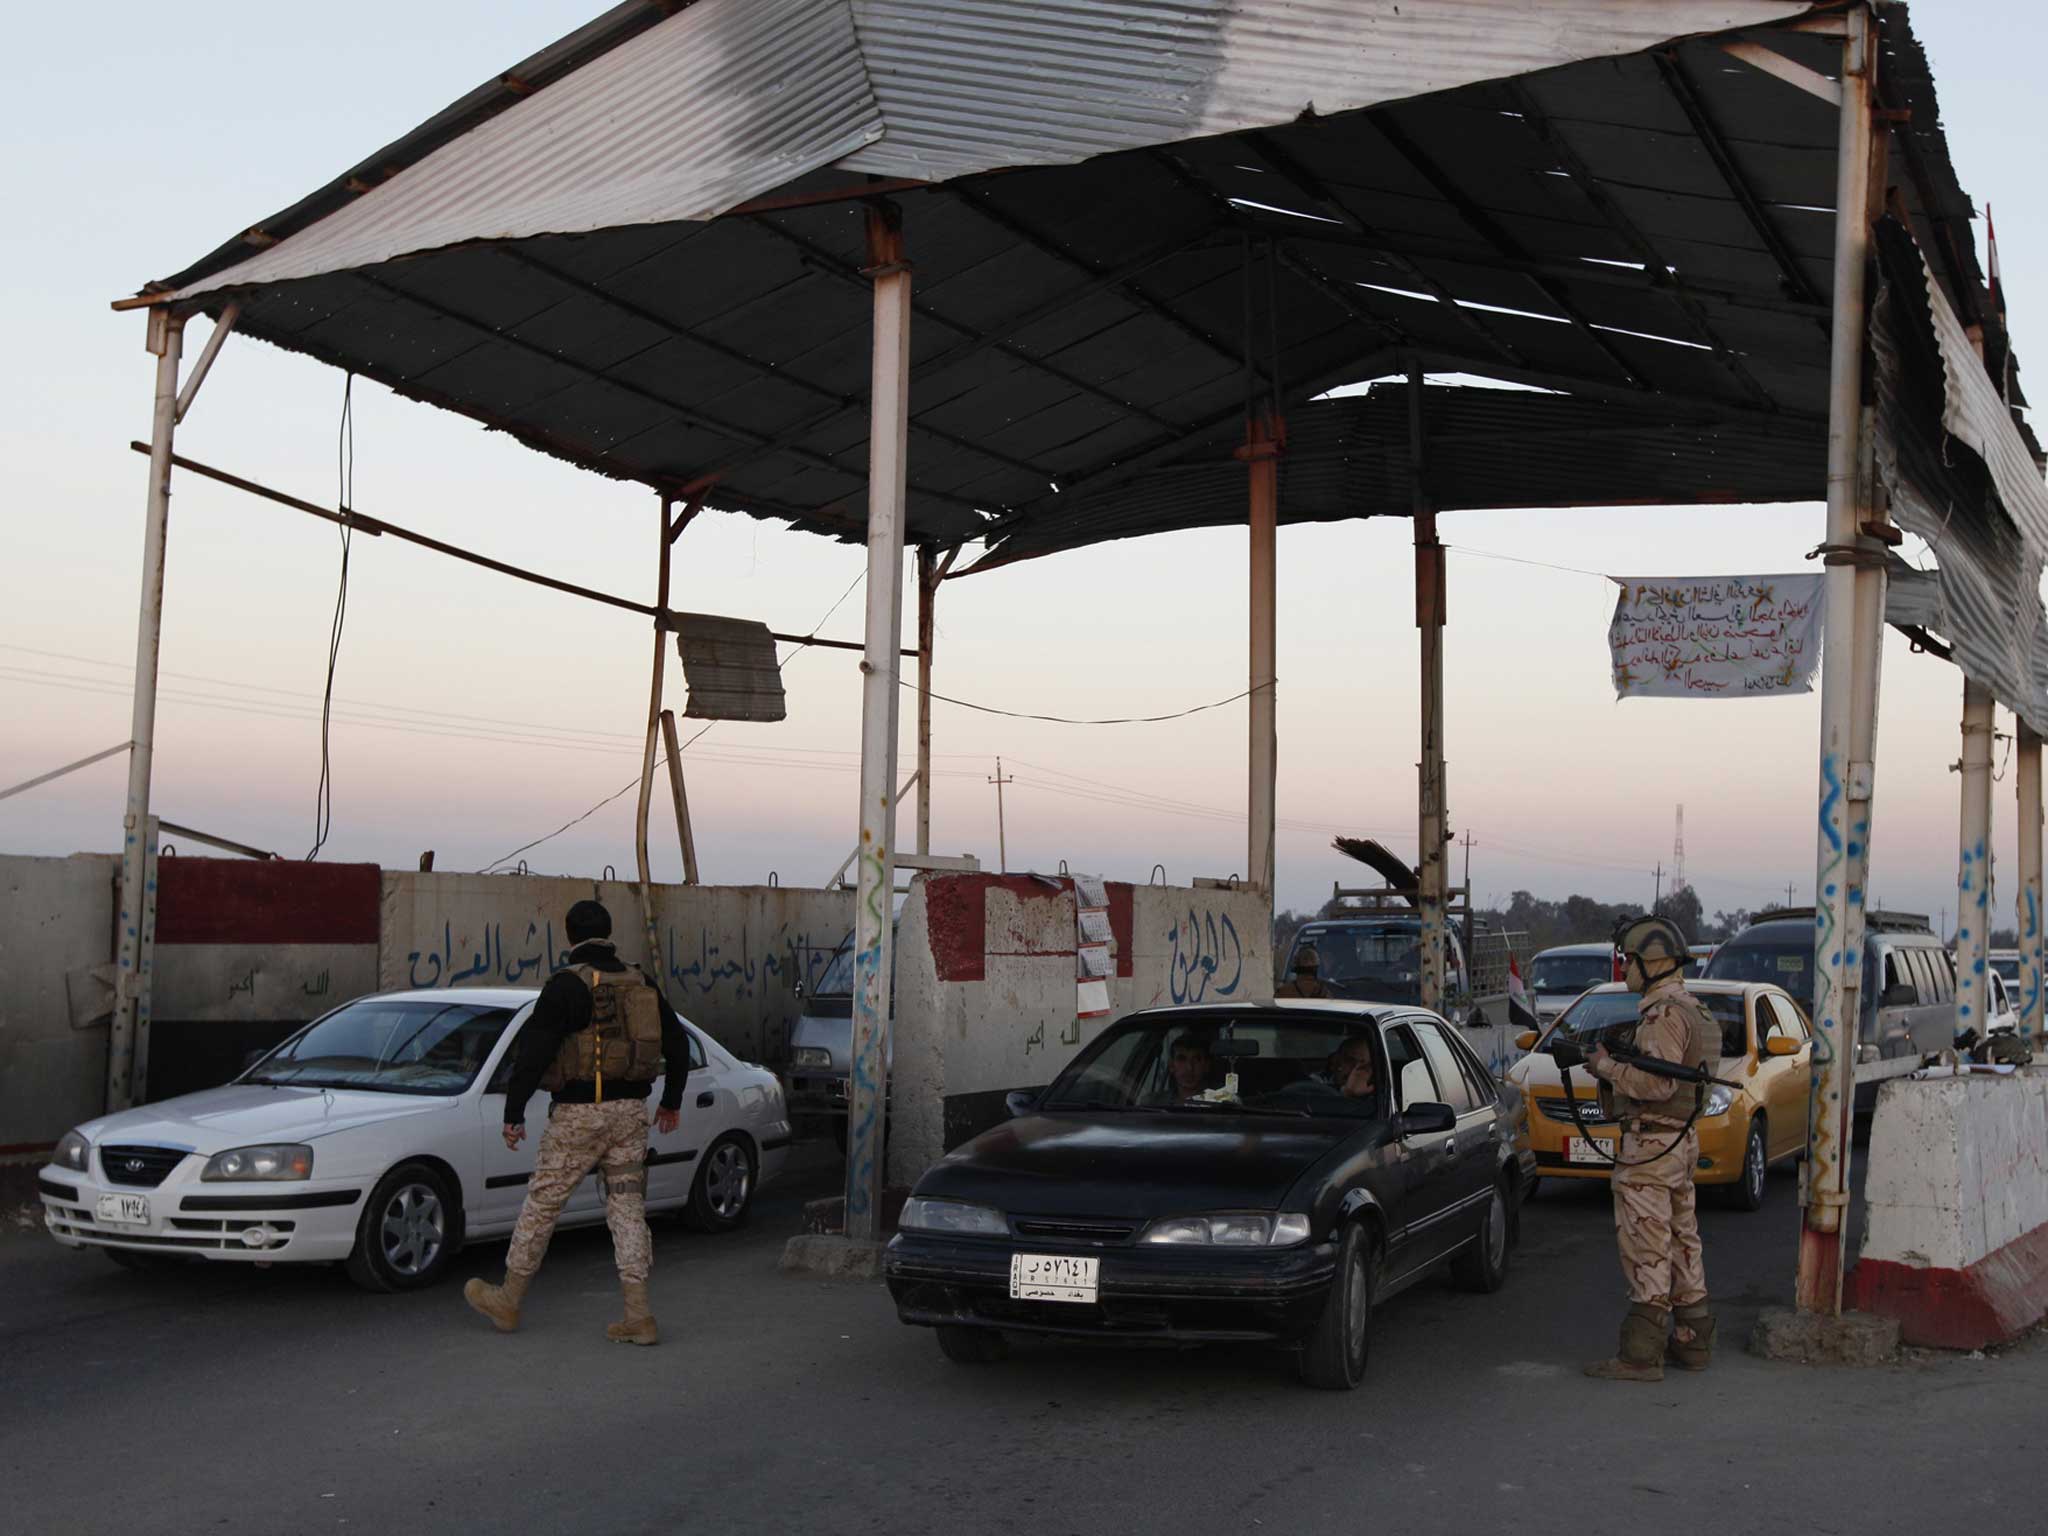 Iraqi soldiers search vehicles at a check point in the west of Baghdad as part of Prime Minister Nuri al-Maliki's campaign to eradicate al-Qa'ida